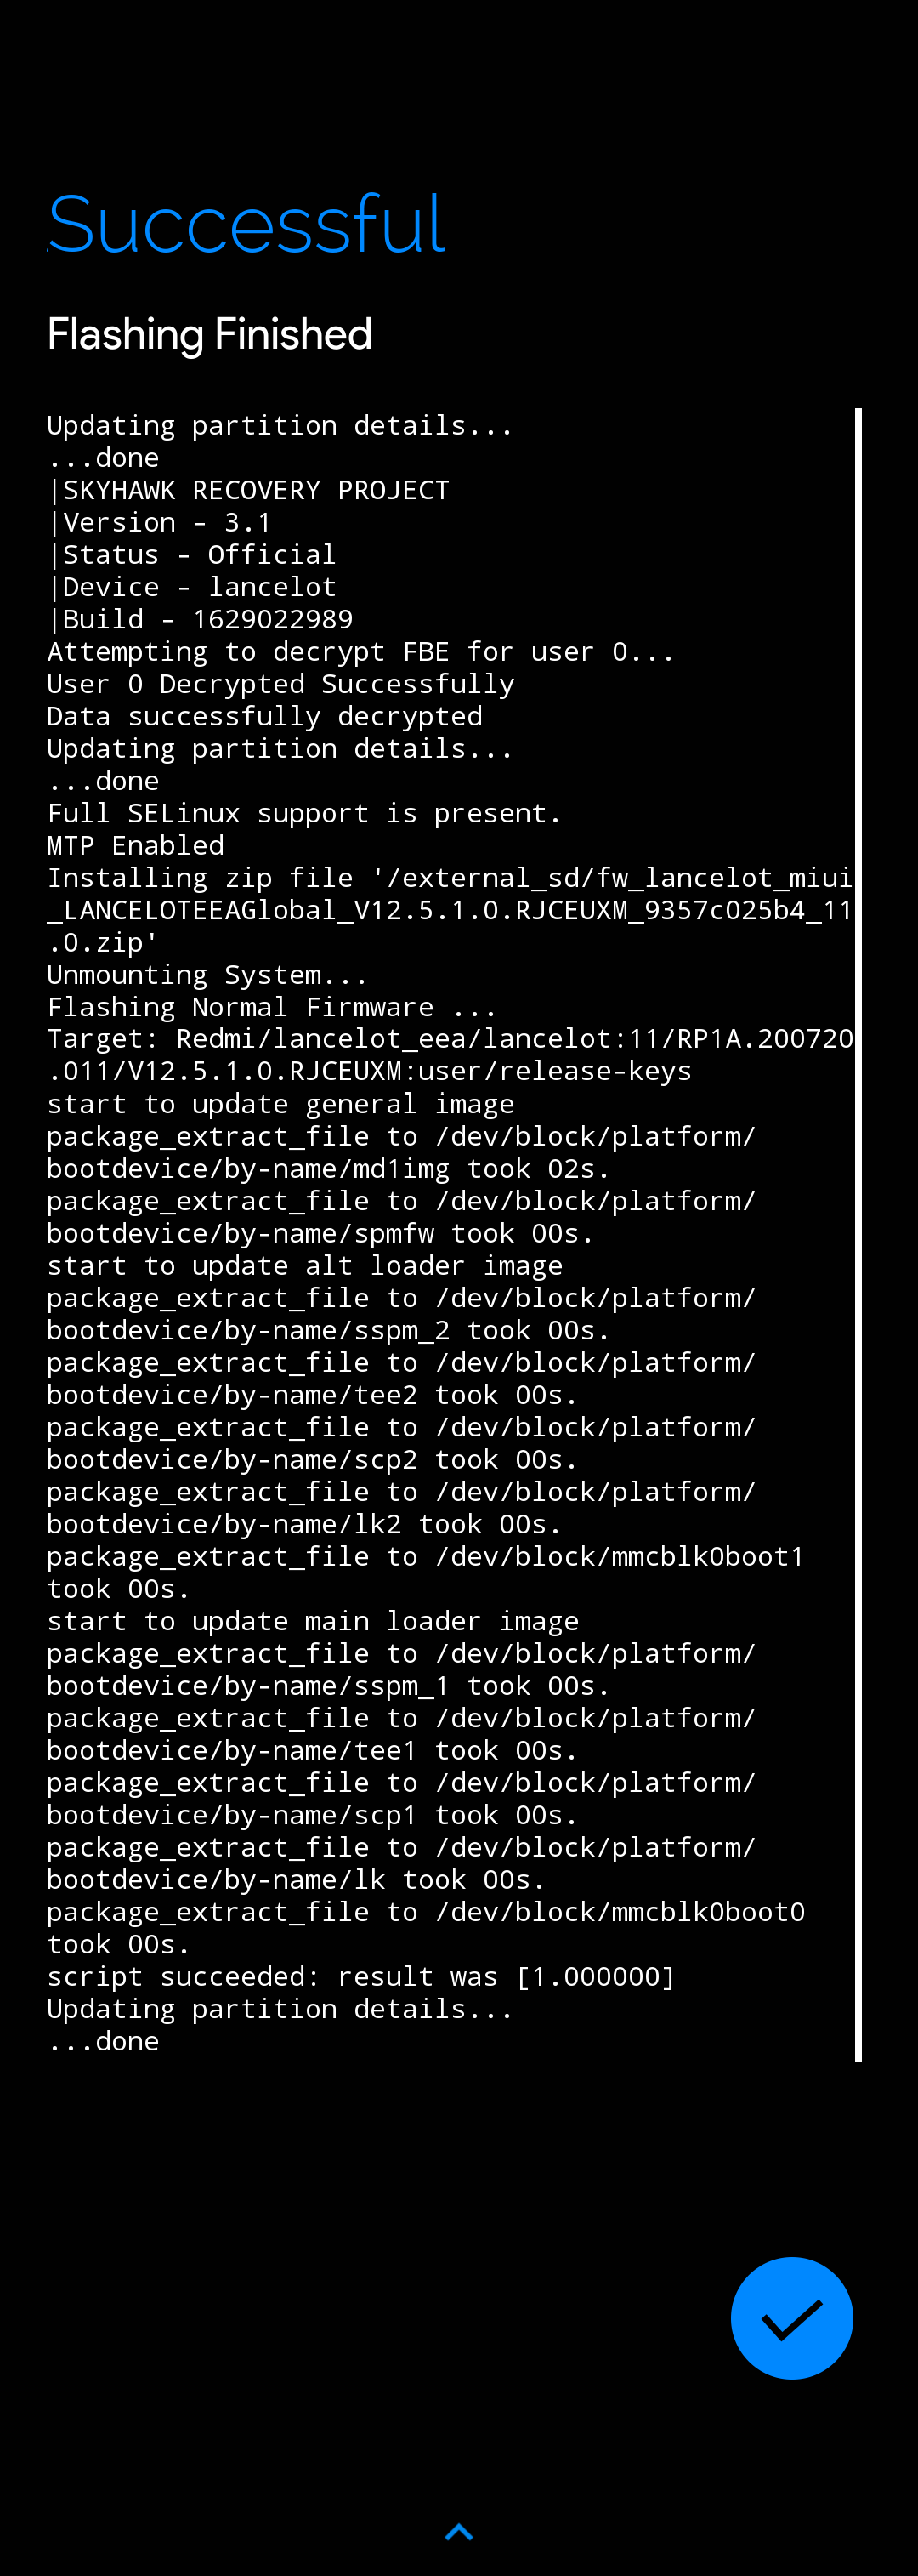 crdroid-android-rom-xiaomi-redmi-9-shrp-flash-firmware-success